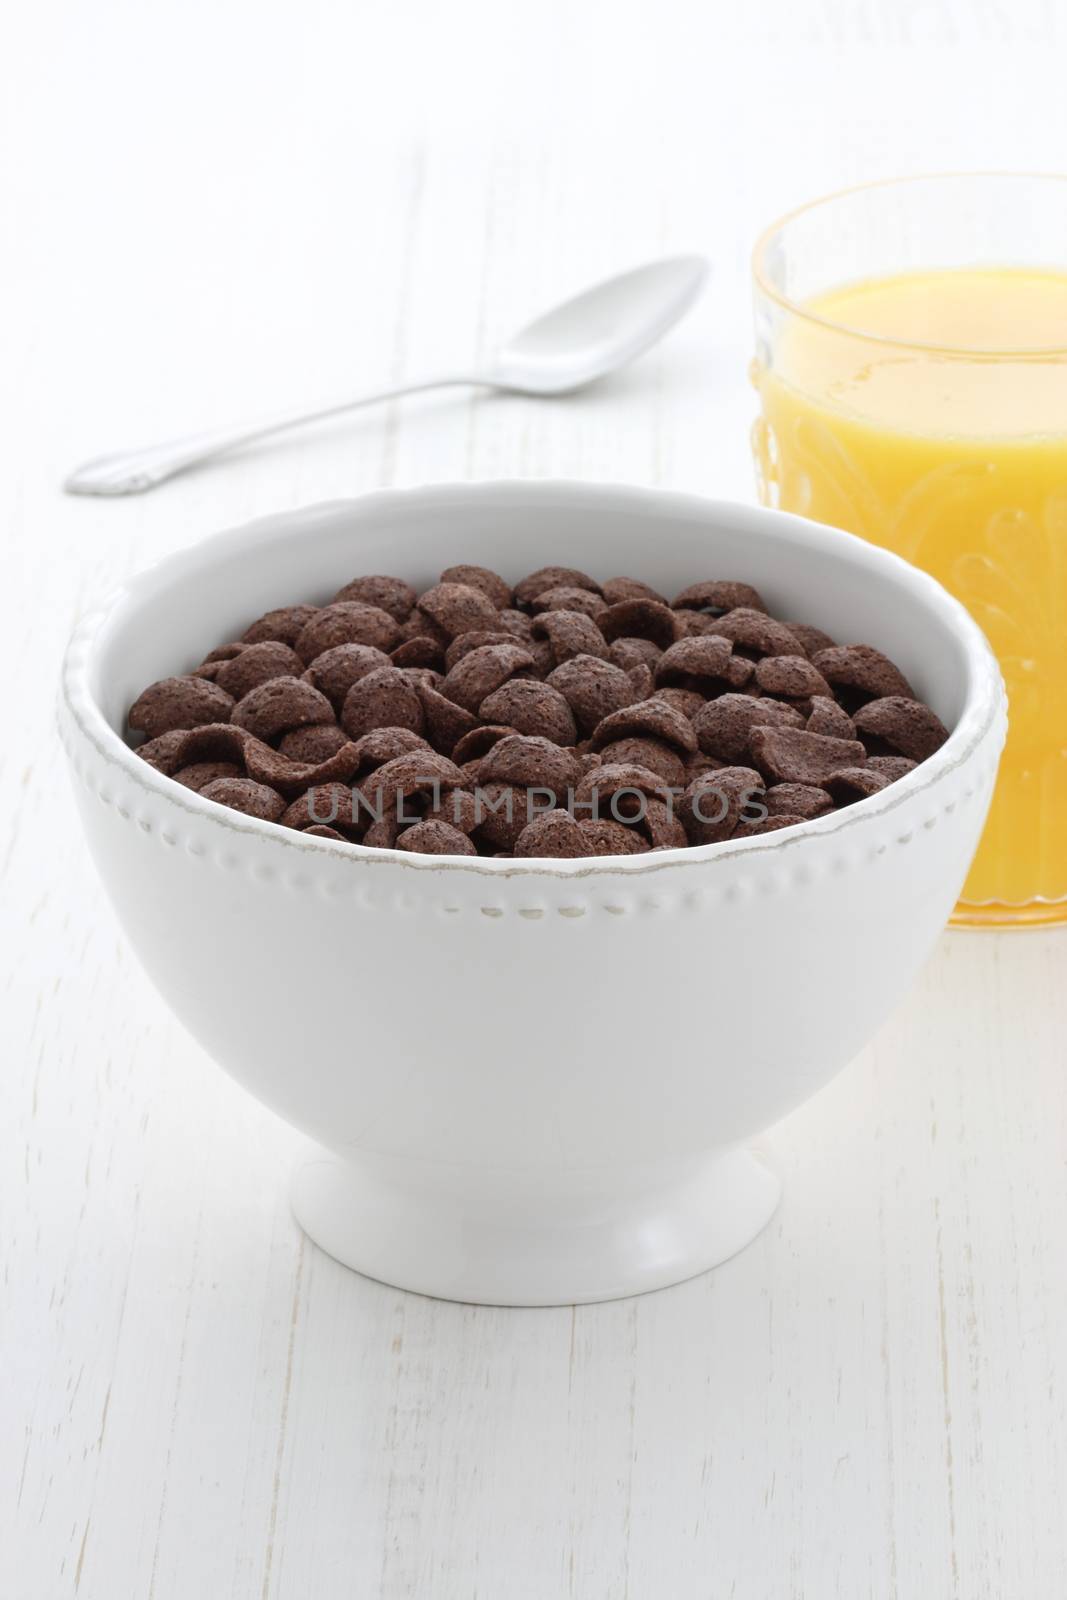 delicious and nutritious whole wheat and oats chocolate cereal, flavorful, funny and healthy addition to kids breakfast 